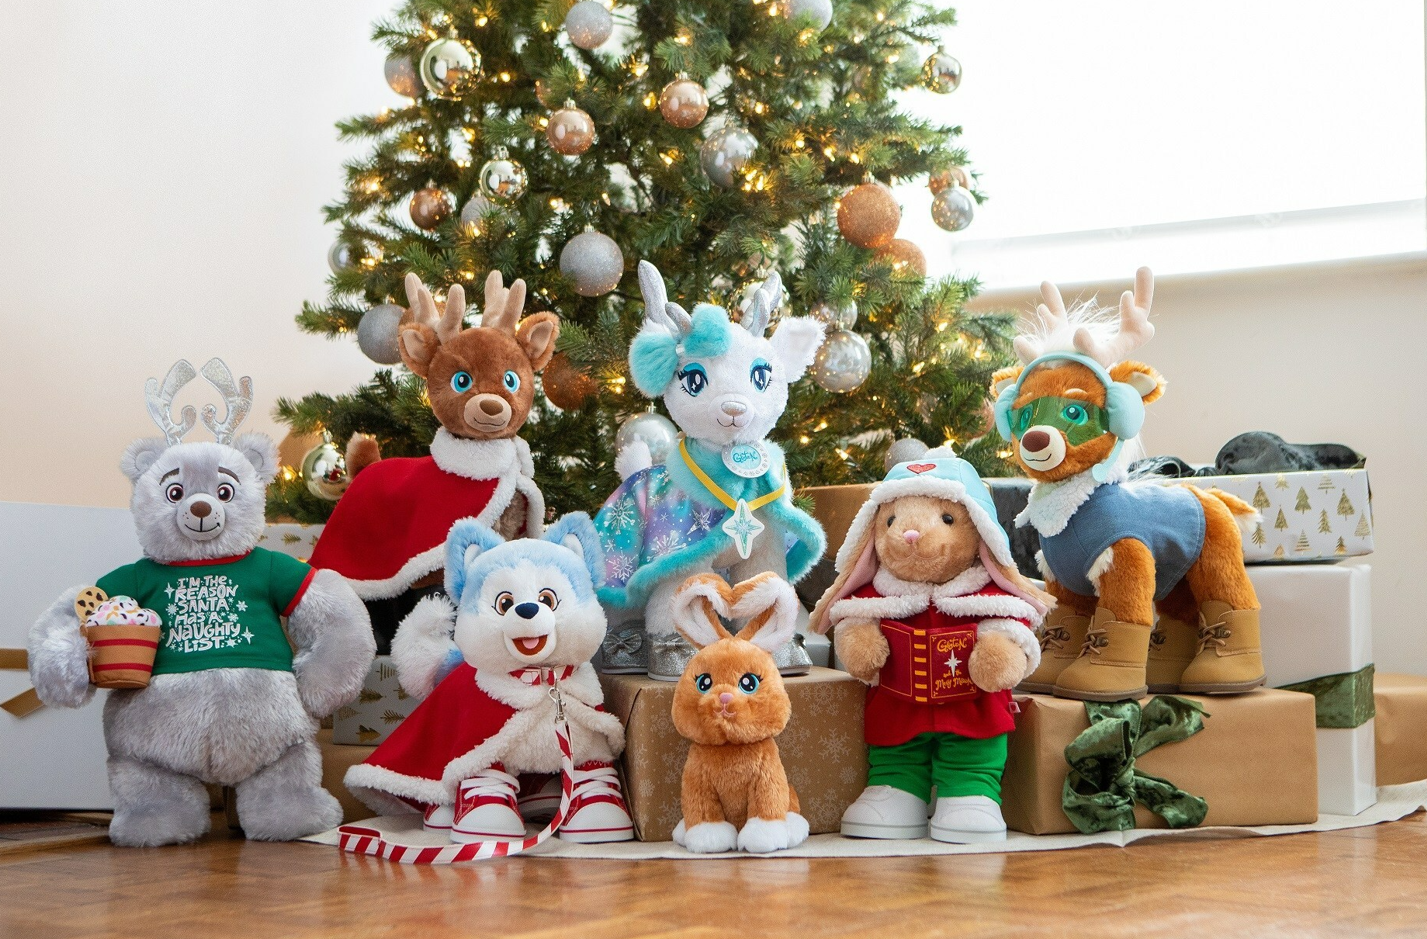 Build-A-Bear Released A New Merry Mission Plush Collection Based off The New Build-A-Bear Movie